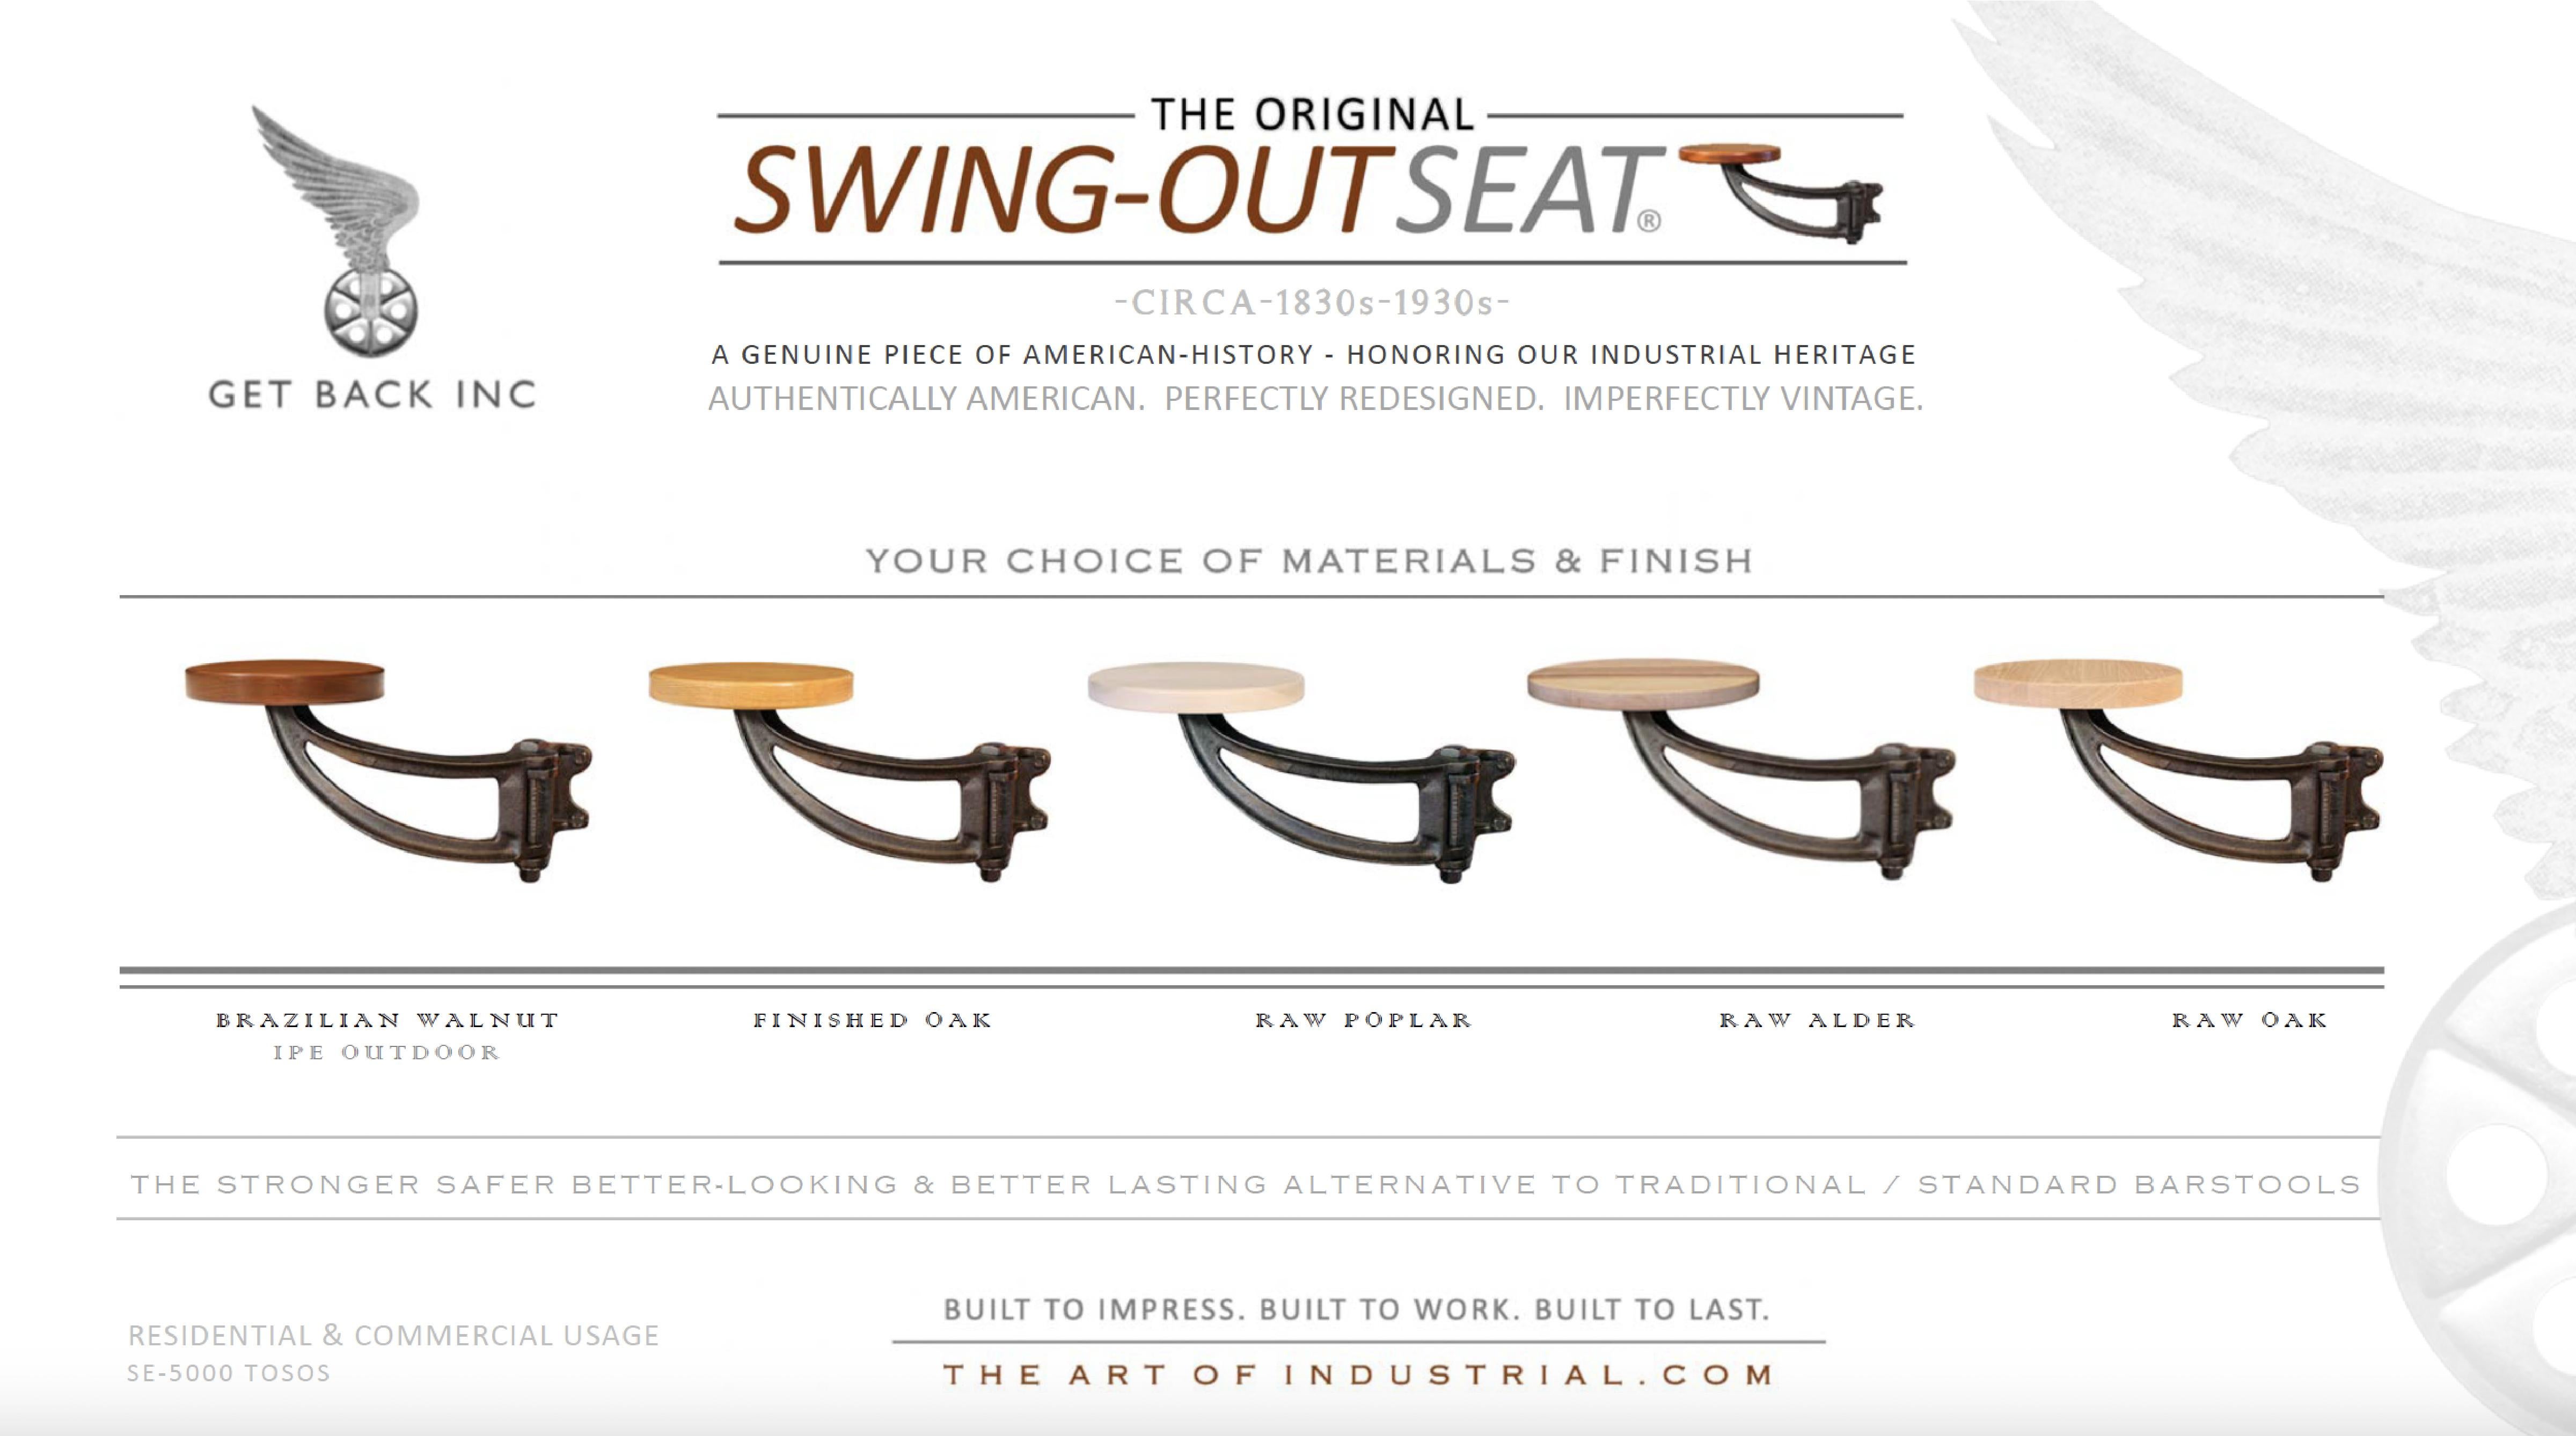 The Get Back Original Swing-Out Seat is now offered in a finished 12